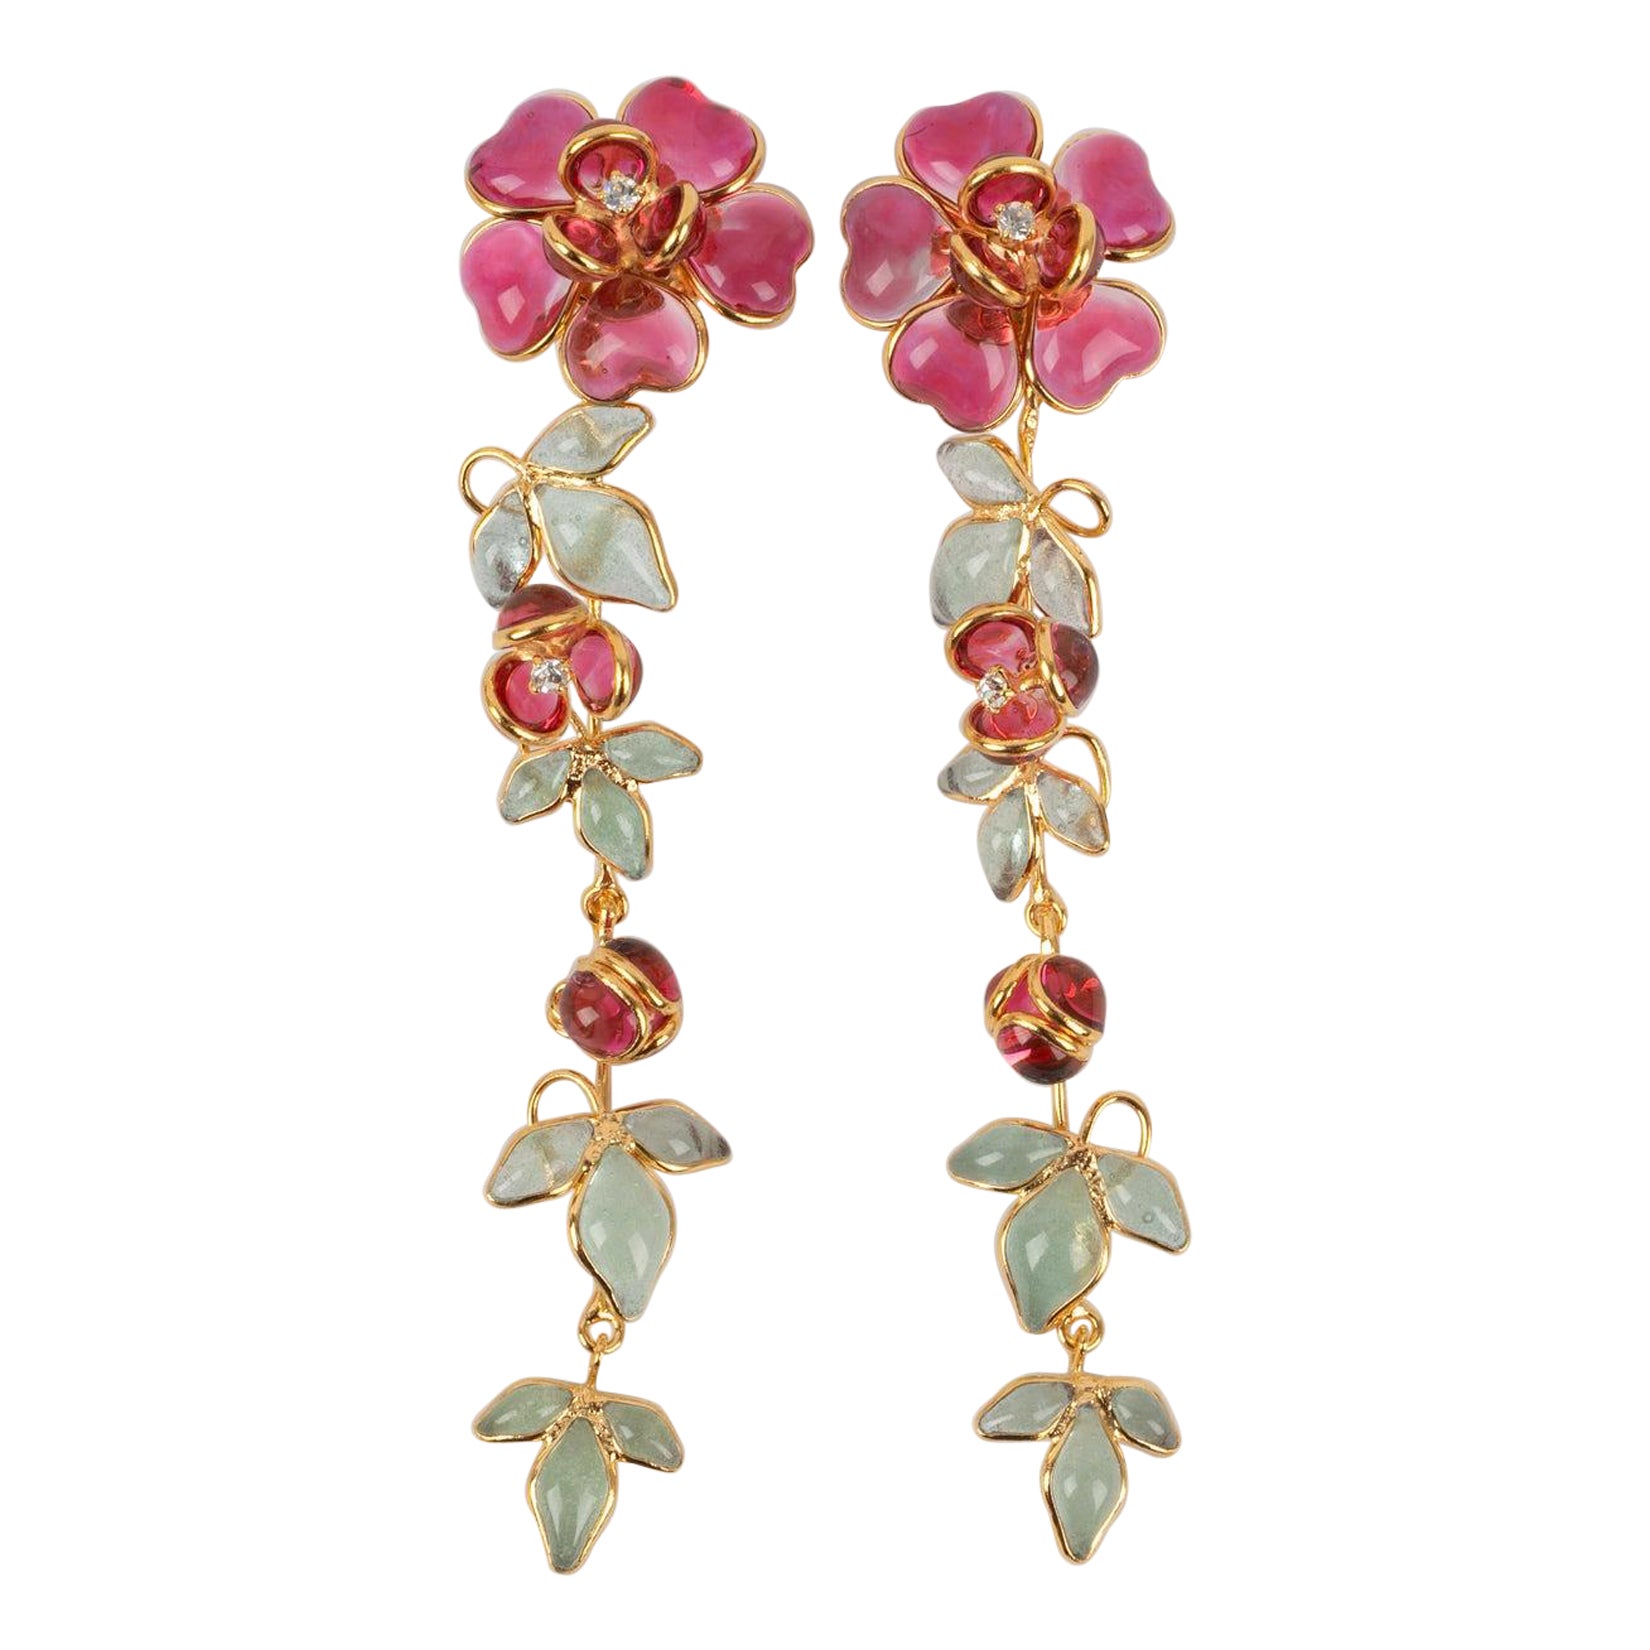 Augustine Golden Metal Earrings with Glass Paste in Pink Tones For Sale